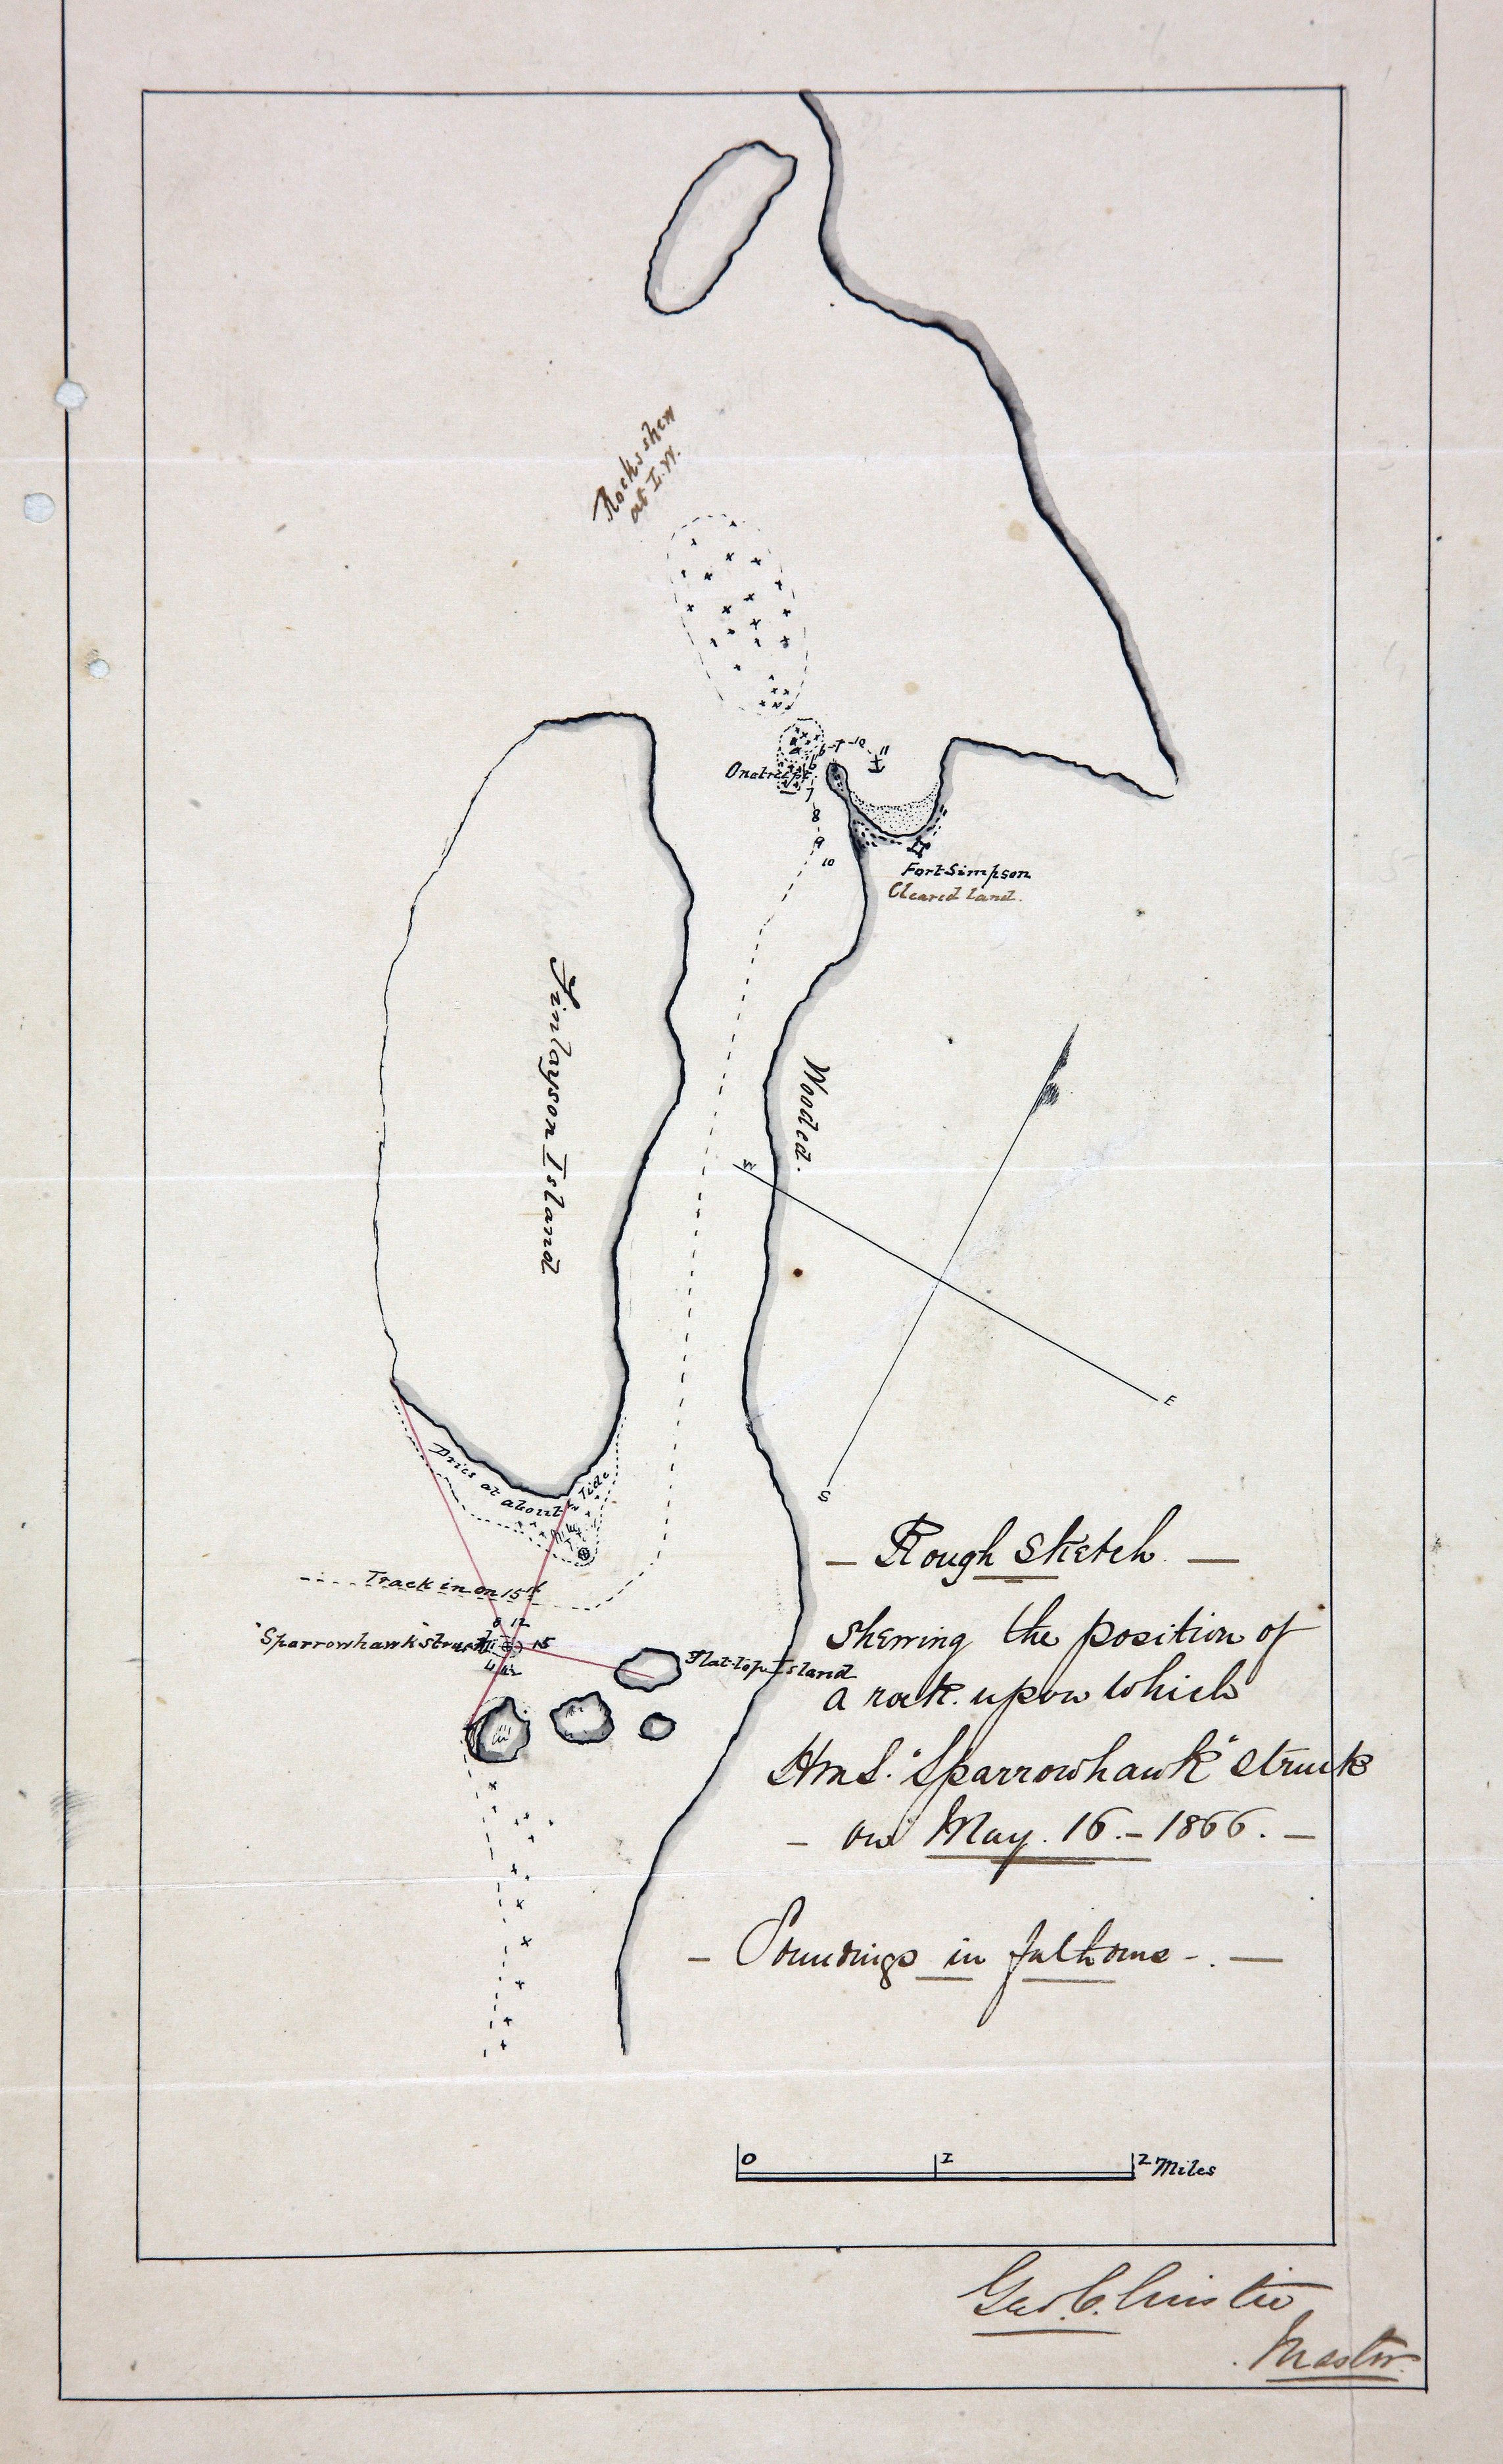 Sketch showing the position of a rock at Port Simpson (now Lax Kw'alaams), British Columbia (now in Canada) on which HMS Sparrowhawk struck on May 16 1866, with Fort Simpson, Finlayson Island and the track of the ship.